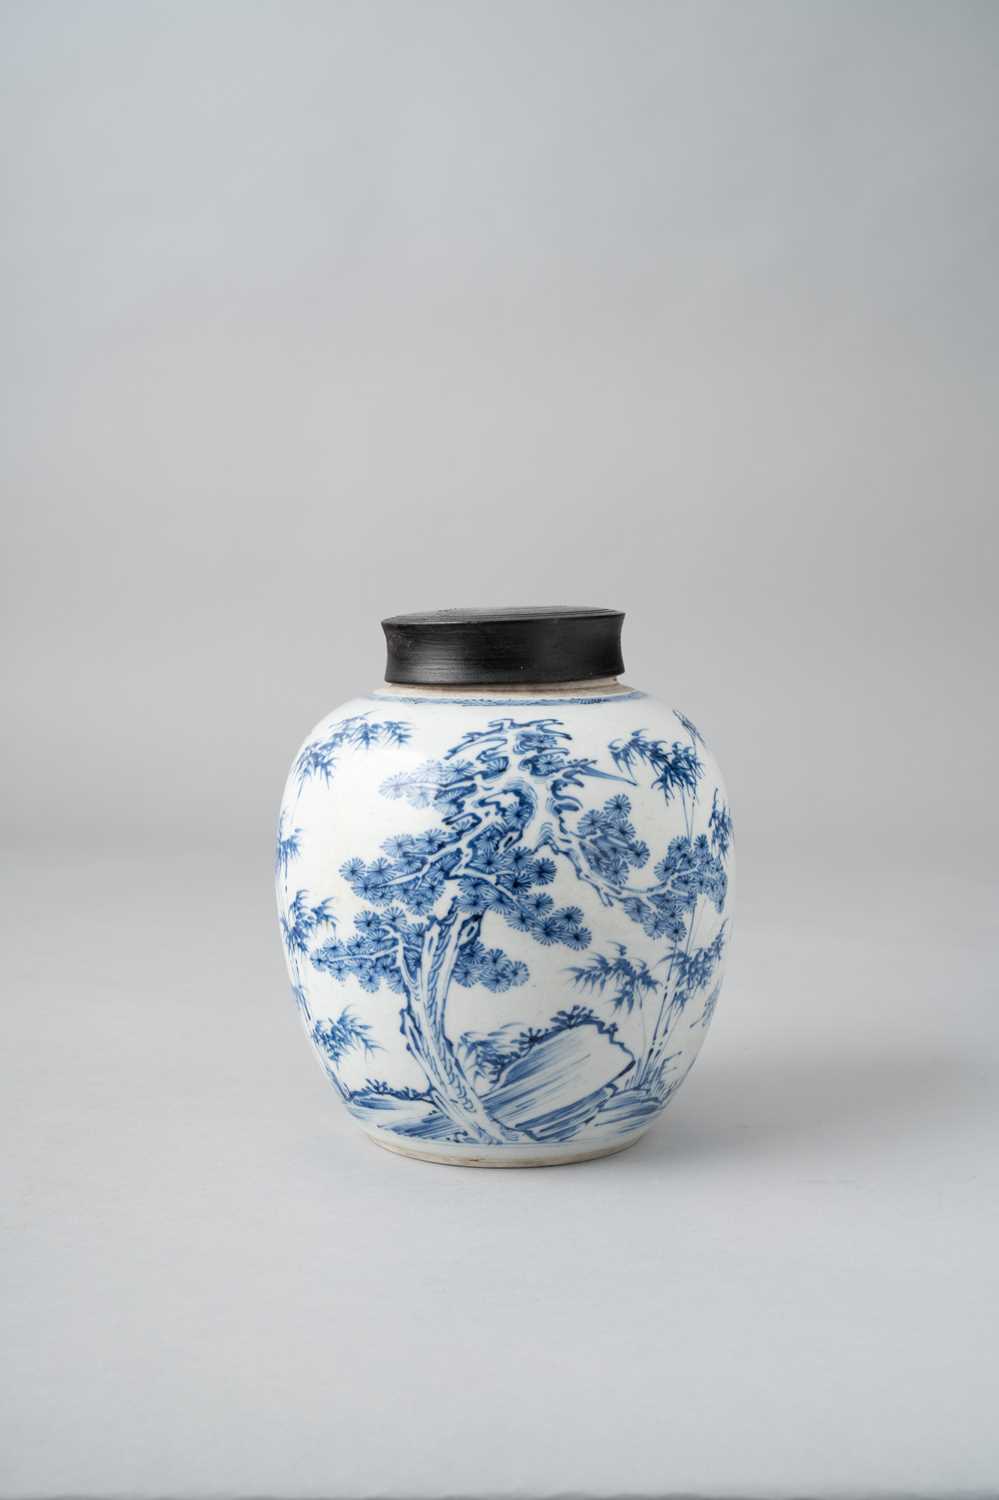 NO RESERVE A CHINESE BLUE AND WHITE 'THREE FRIENDS OF WINTER' OVOID VASE KANGXI 1662-1722